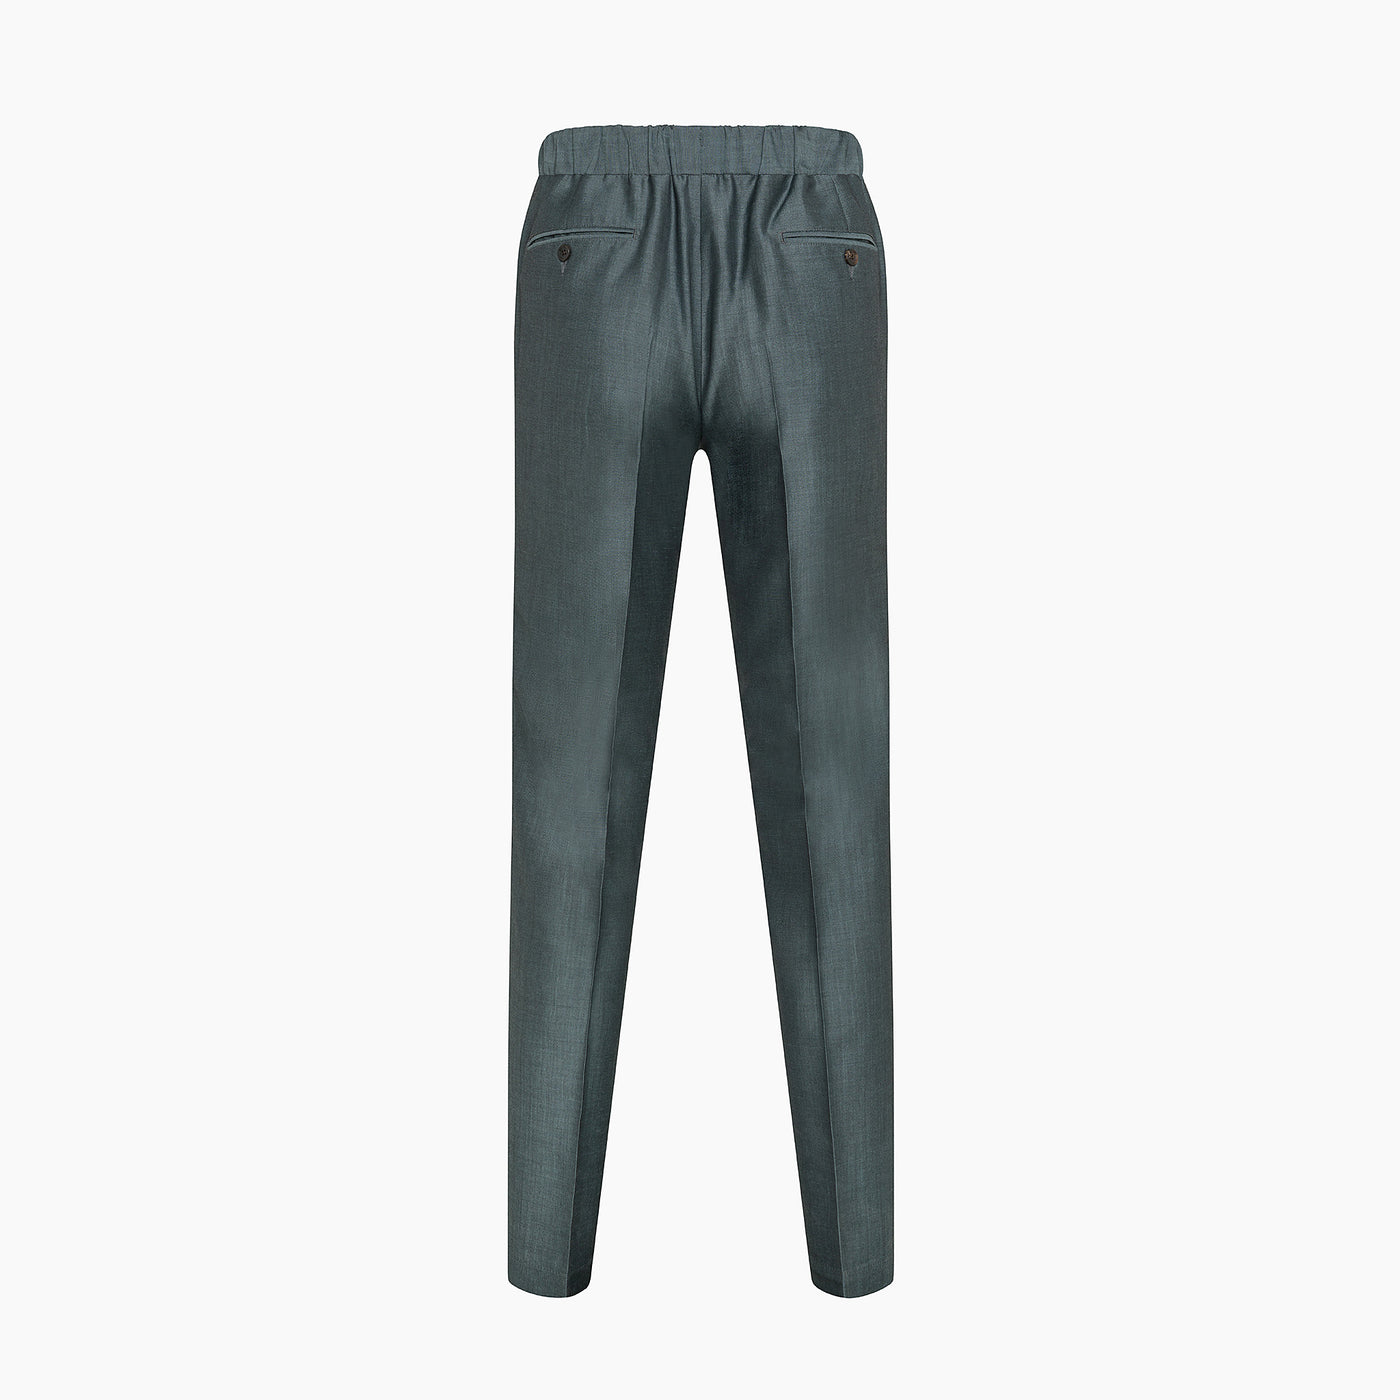 Vince easy pant with drawstring in wool and Royal Mohair wool